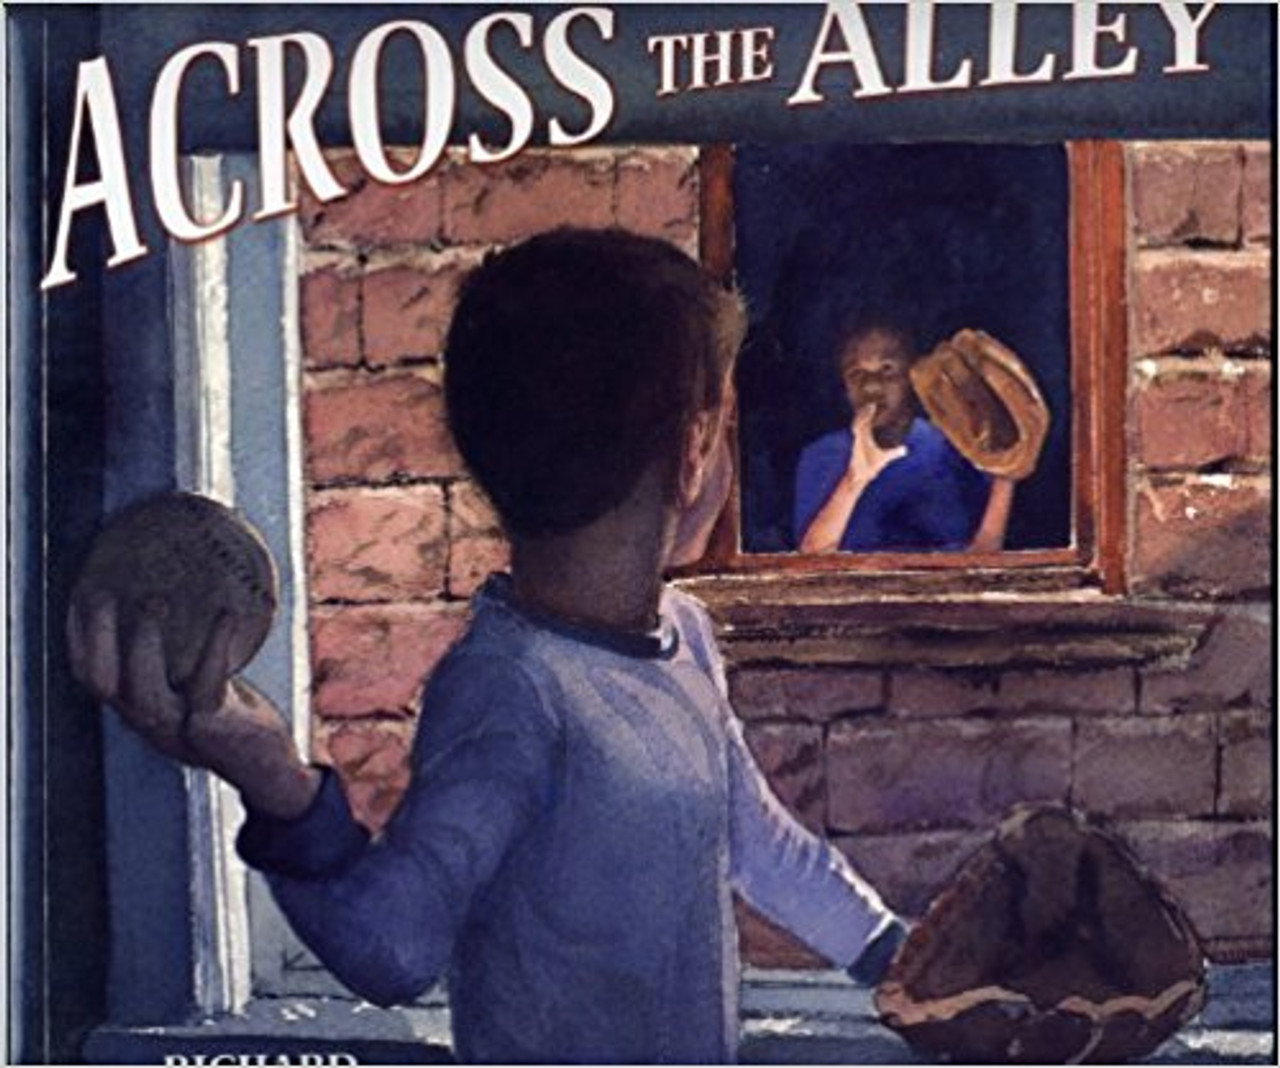 Across the Alley by Richard Michelson